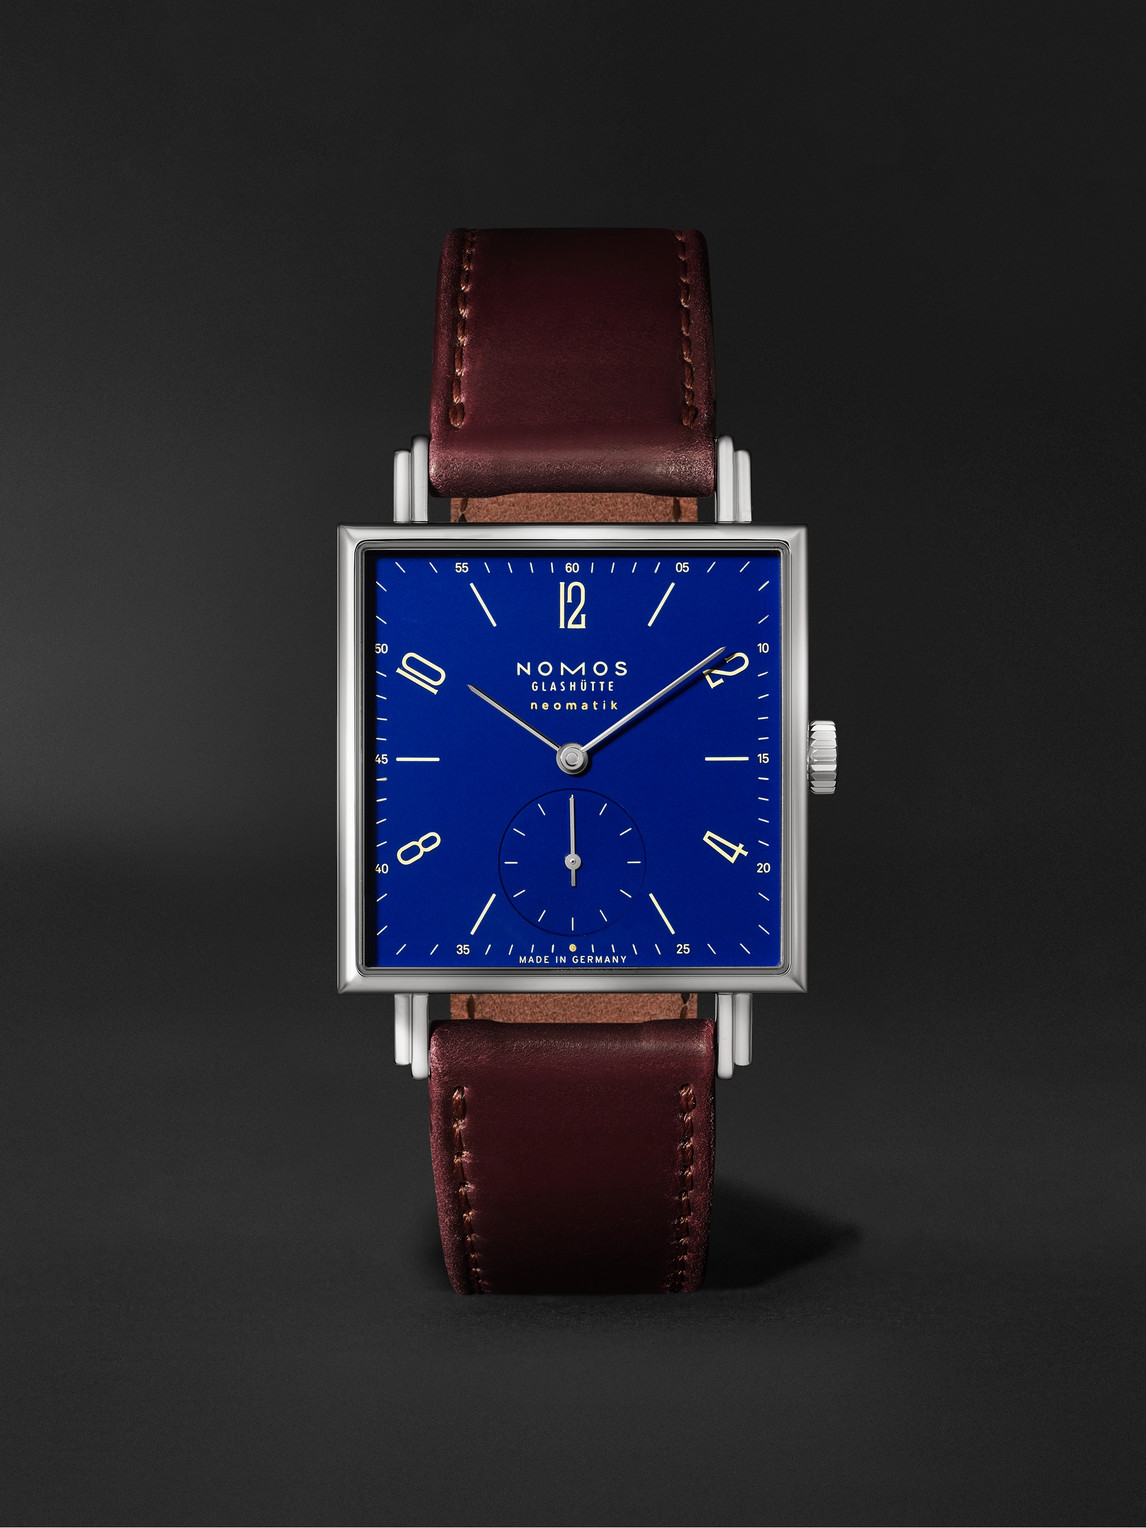 Nomos Glashütte Tetra Neomatik 39 Automatic 46mm Stainless Steel And Leather Watch, Ref. No. 421.s3 In Blue